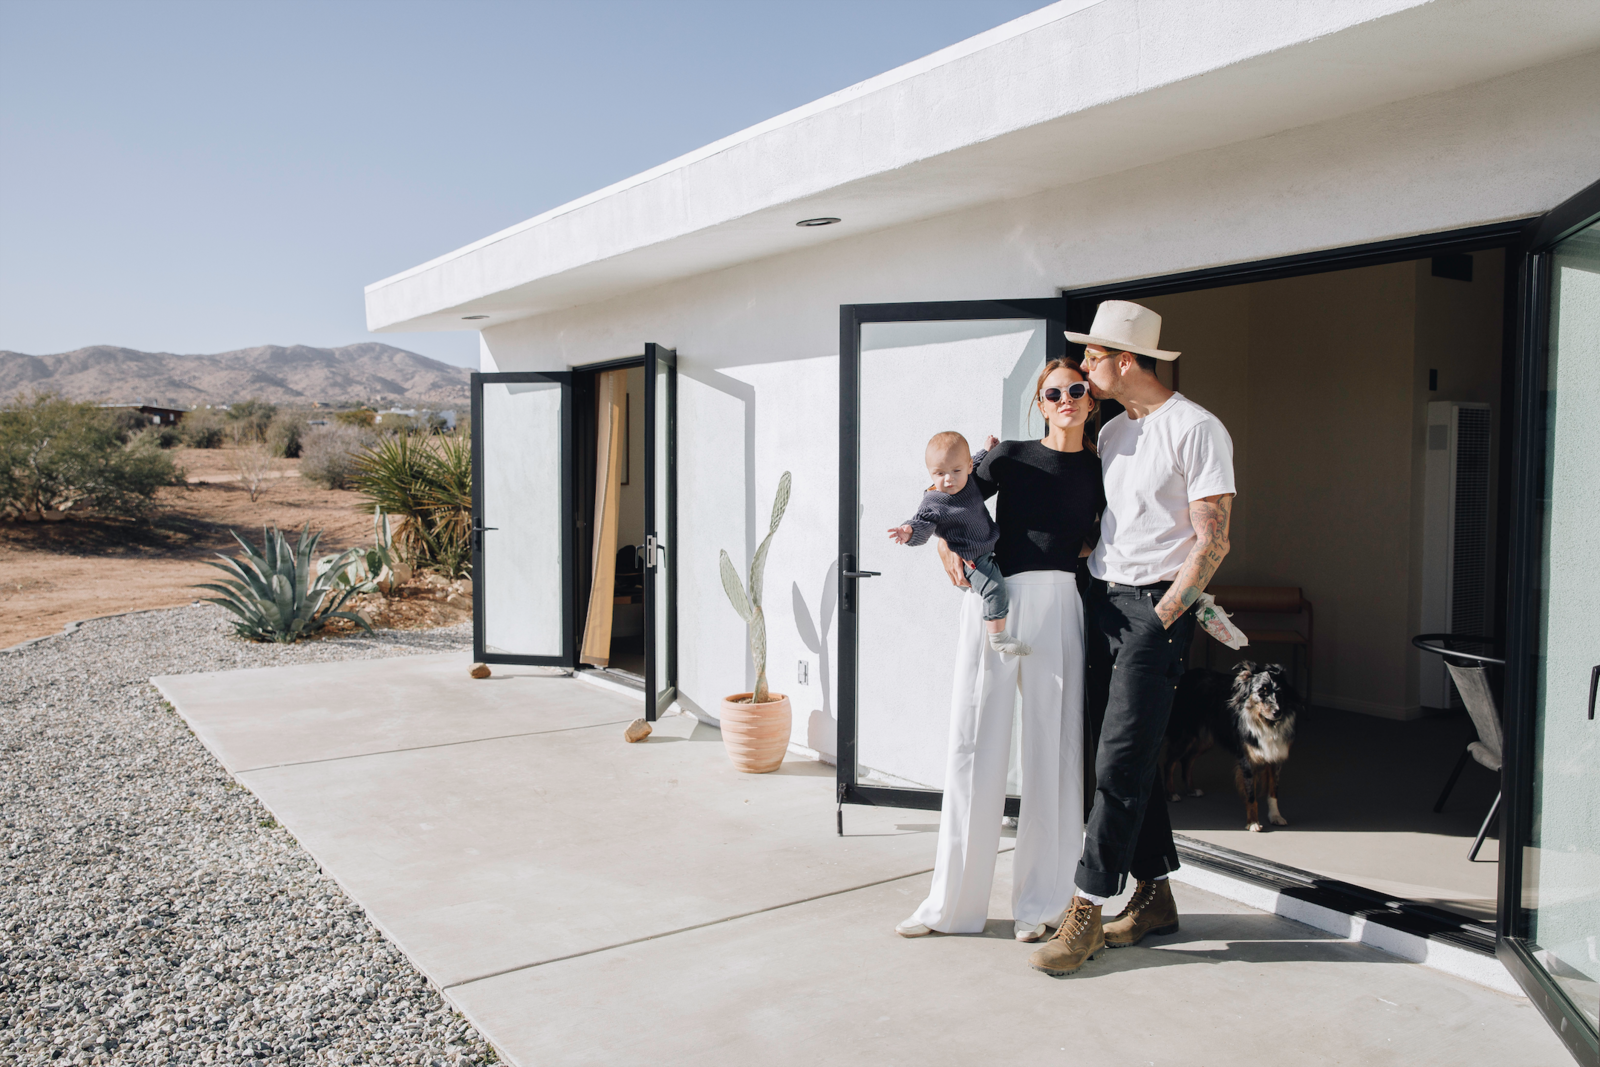 The couple welcome visitors to Casa Mami, a thoughtfully curated, secluded desert getaway.